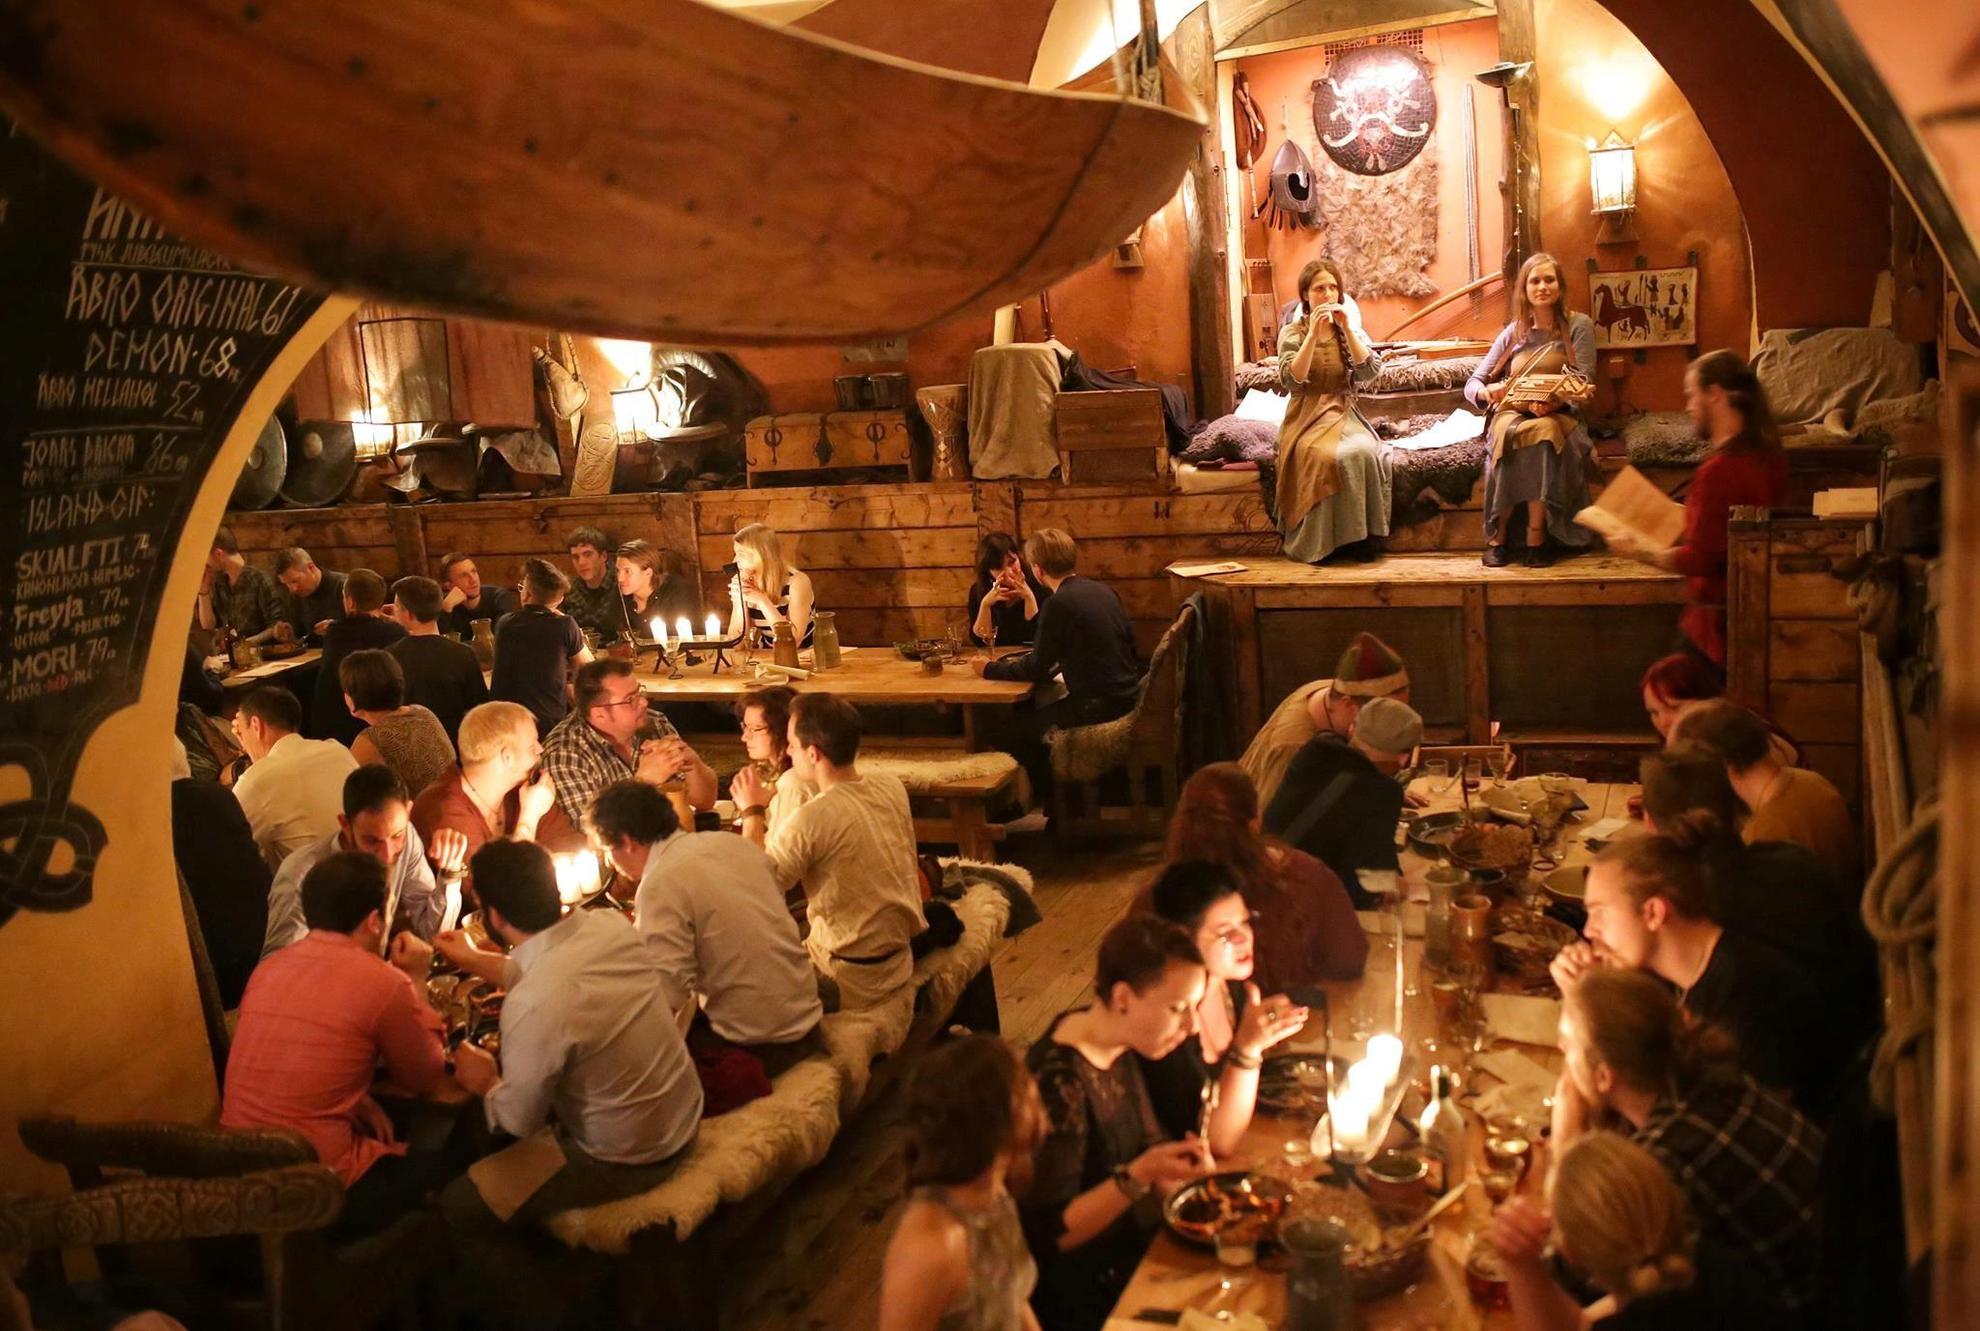 A viking themes restaurant filled with people. On the small stage is two women playing music.